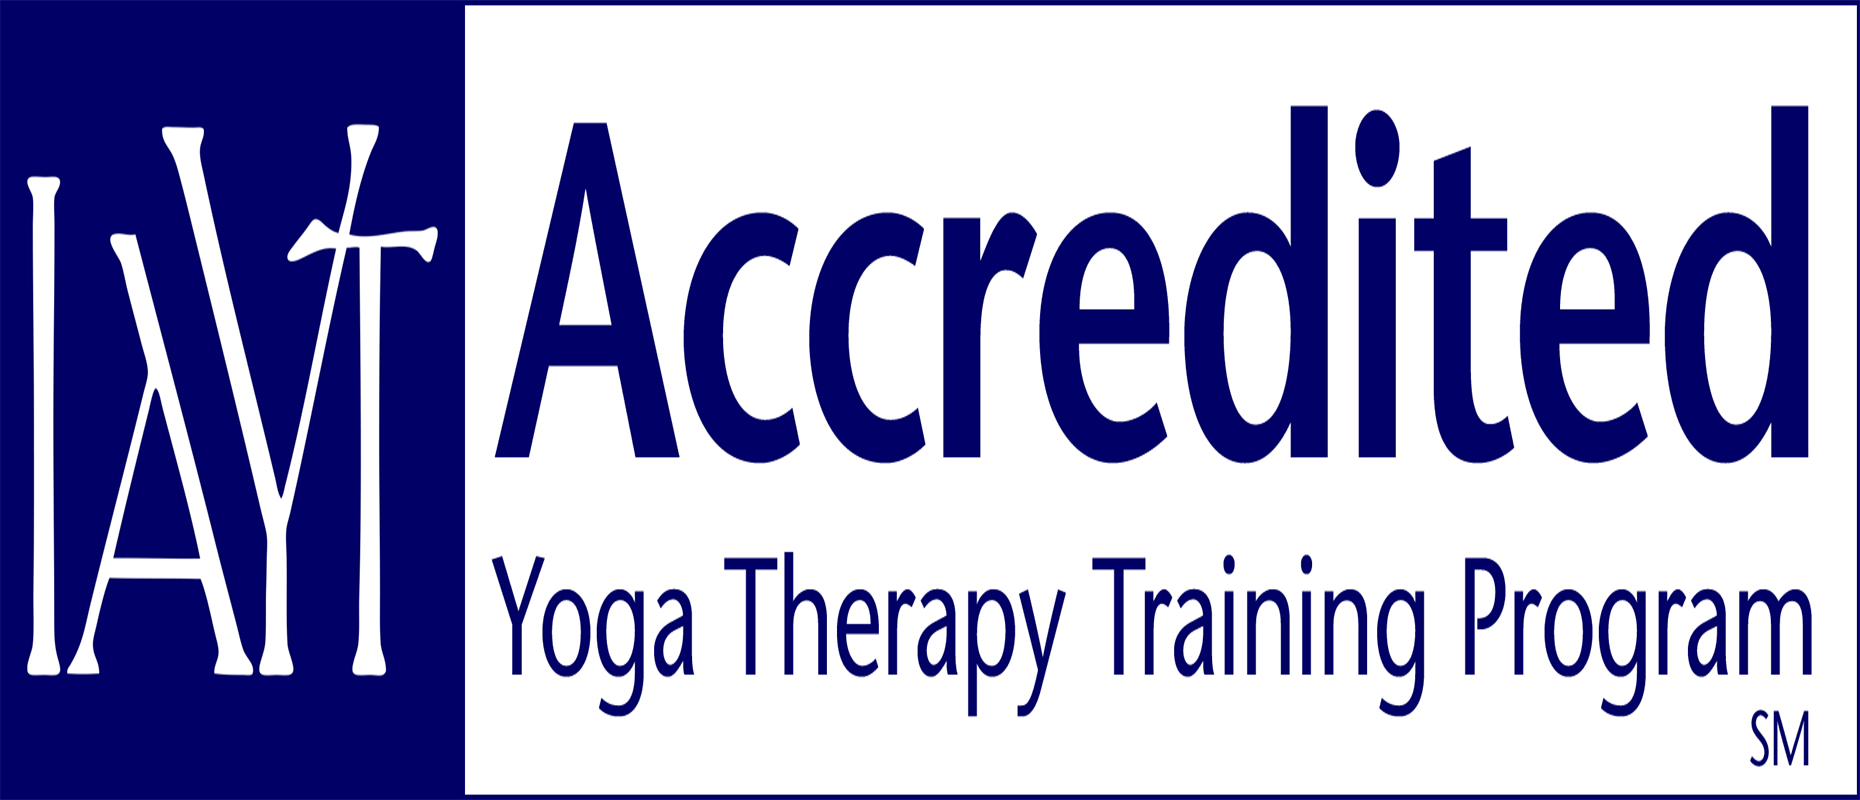 Yoga Therapy Training Course (YTTC)